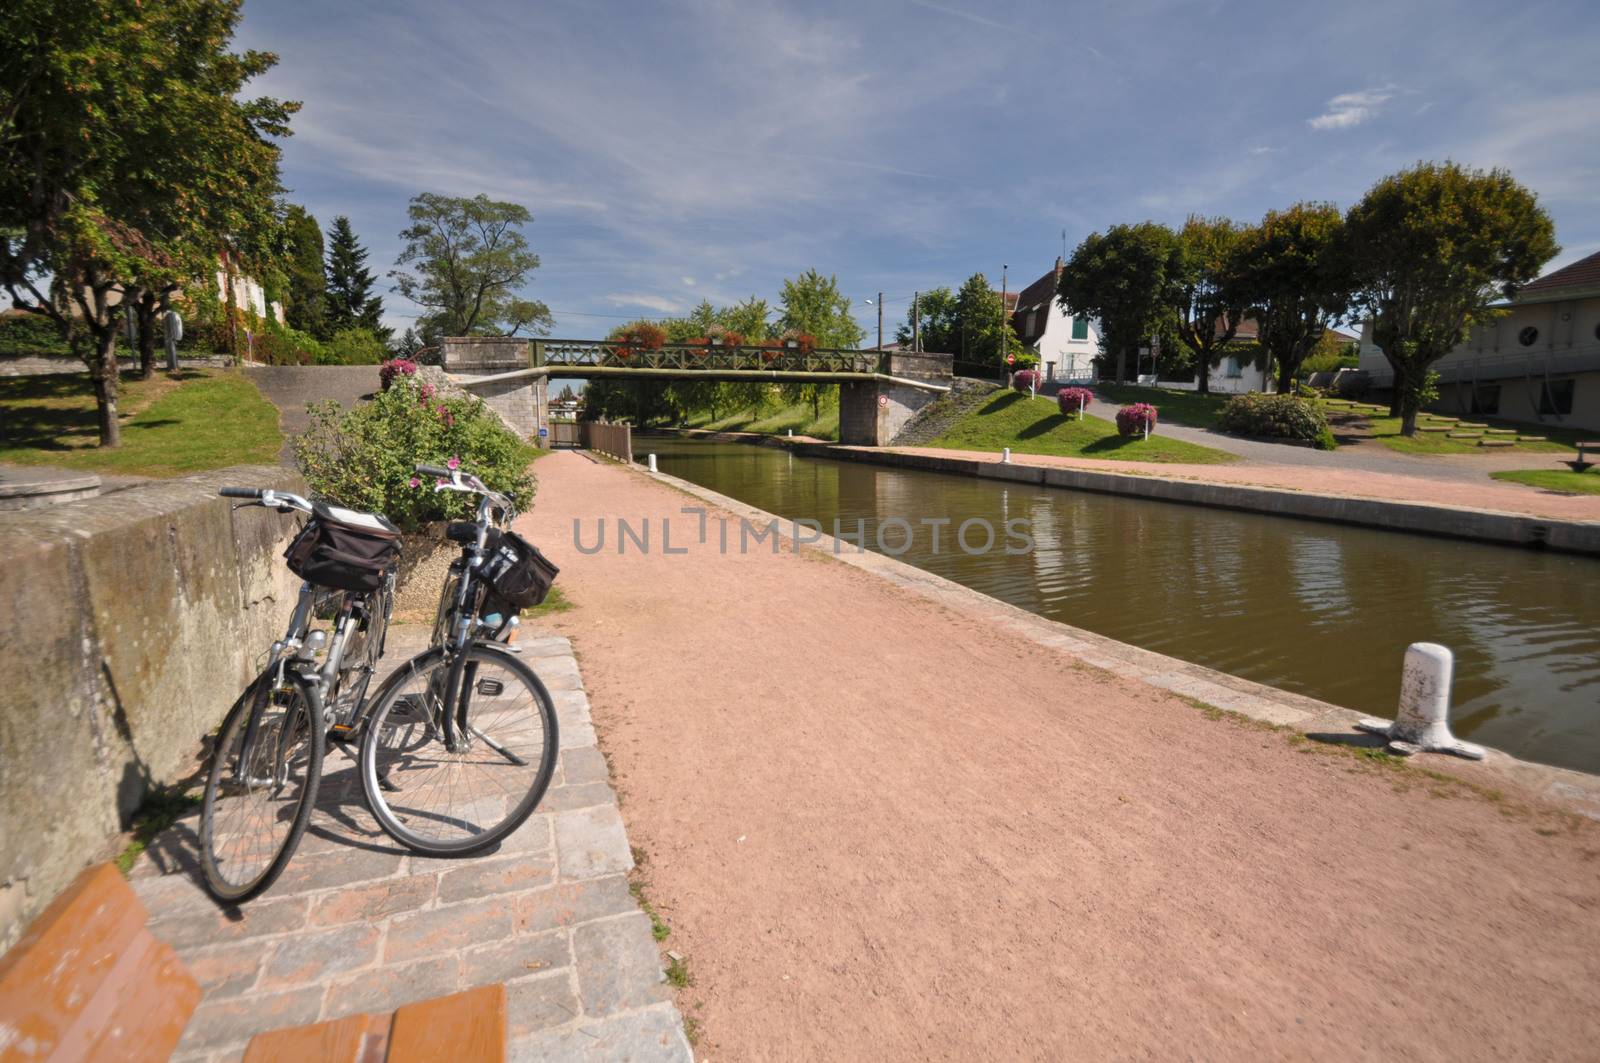 Digoin canal bridge and Voies Verte cycle way. by dpe123